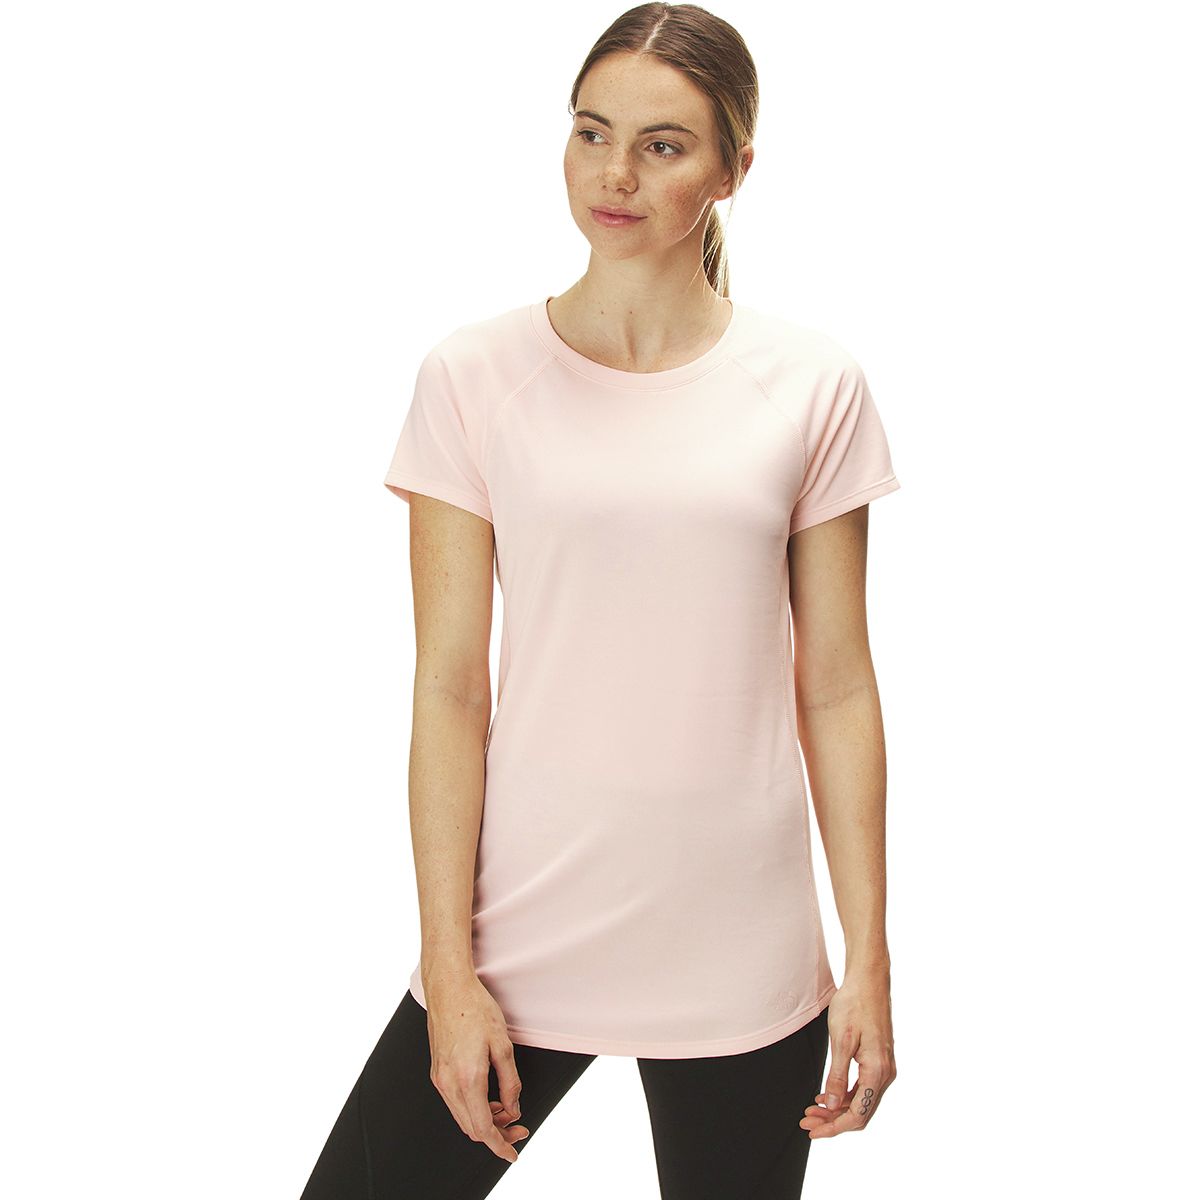 The North Face Presta Crew Top - Women's - Clothing